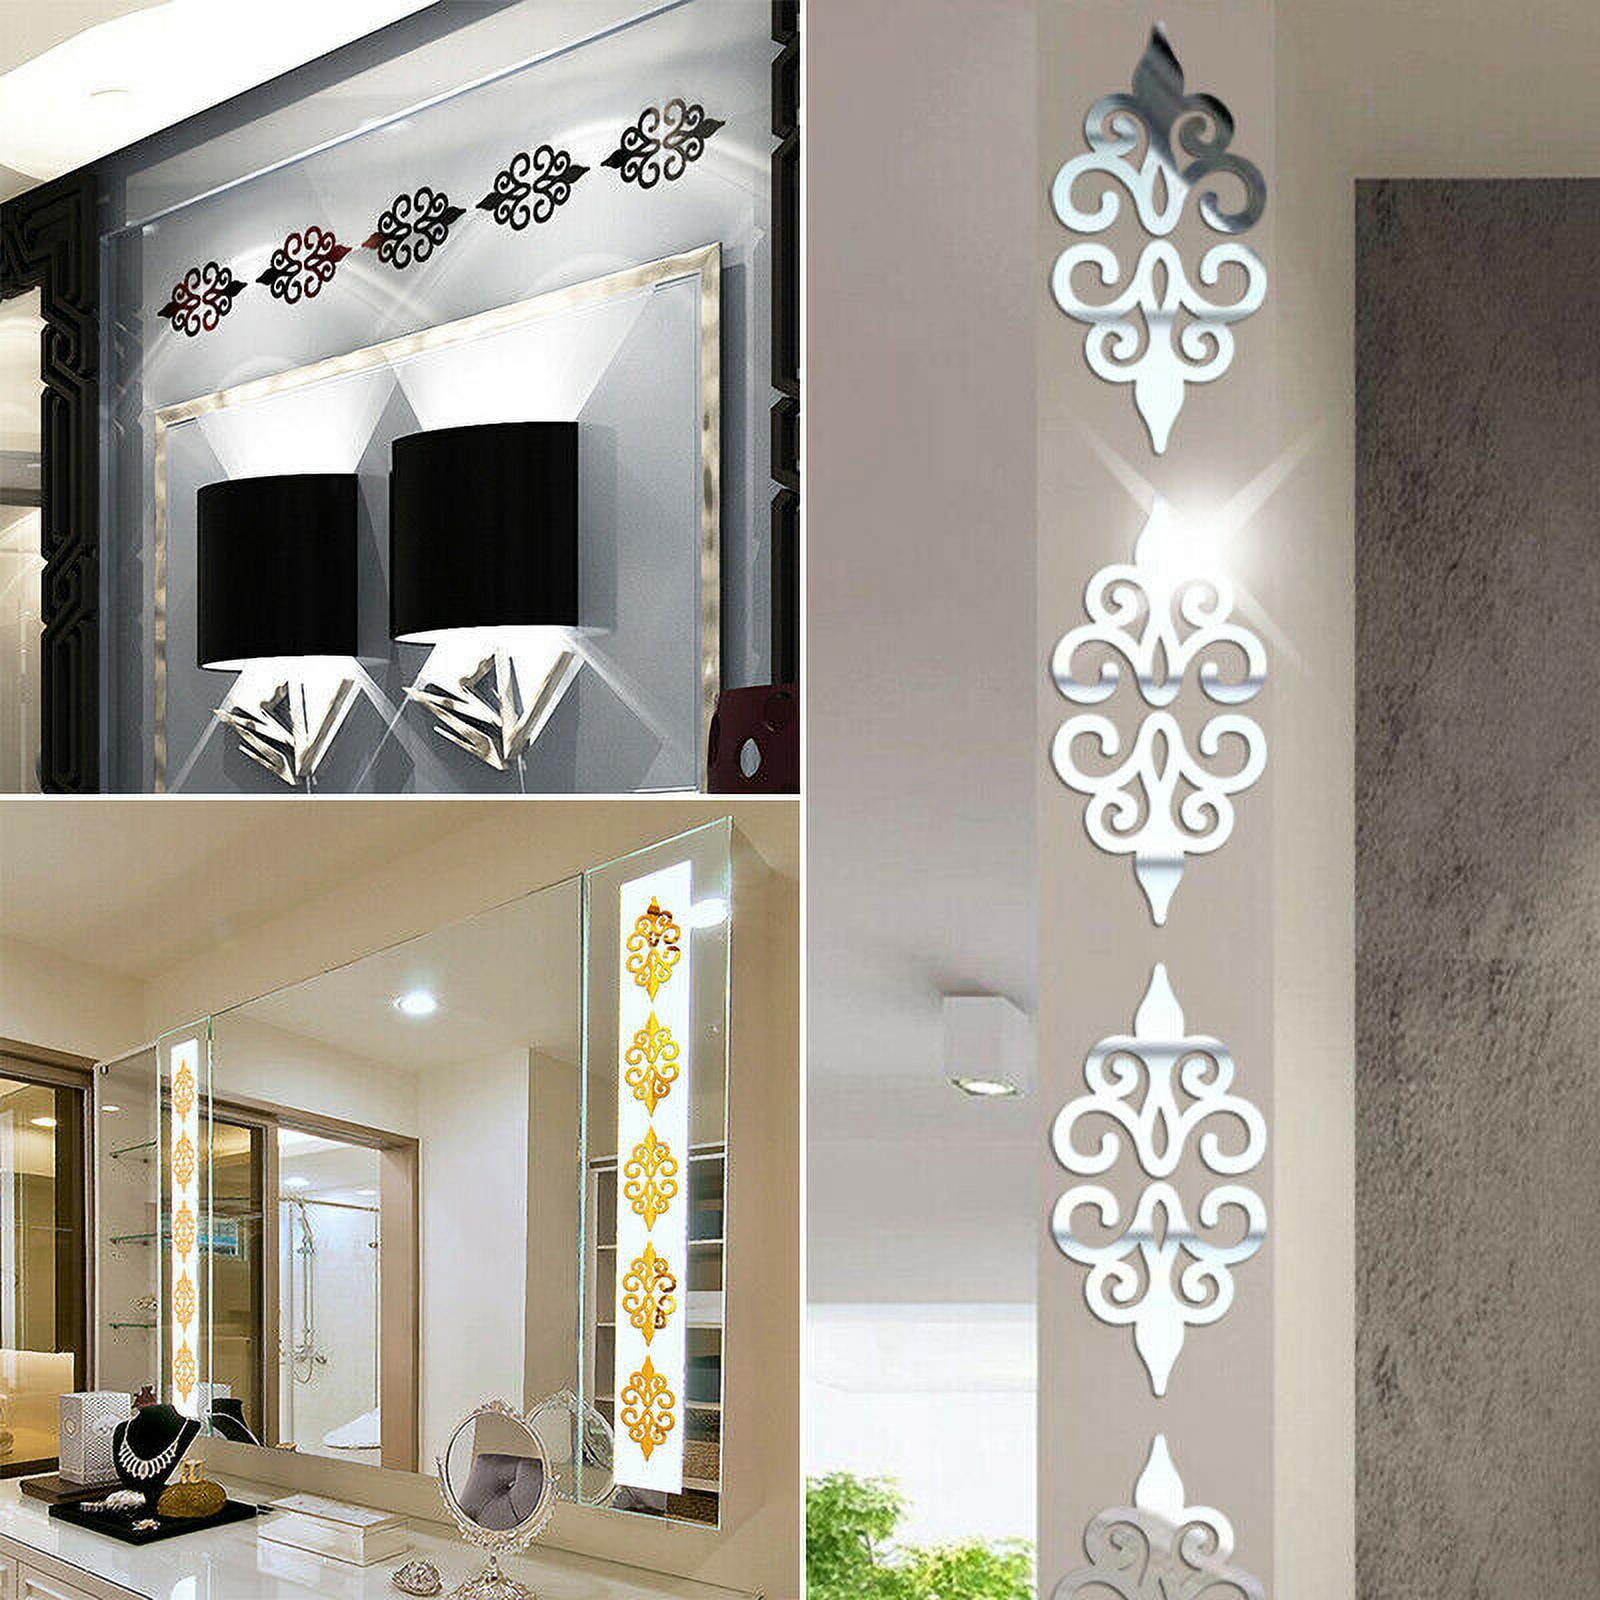 Mirror Removable Wall Door Sticker Art Mural Decal DIY Decoration 15 Styles Pick 